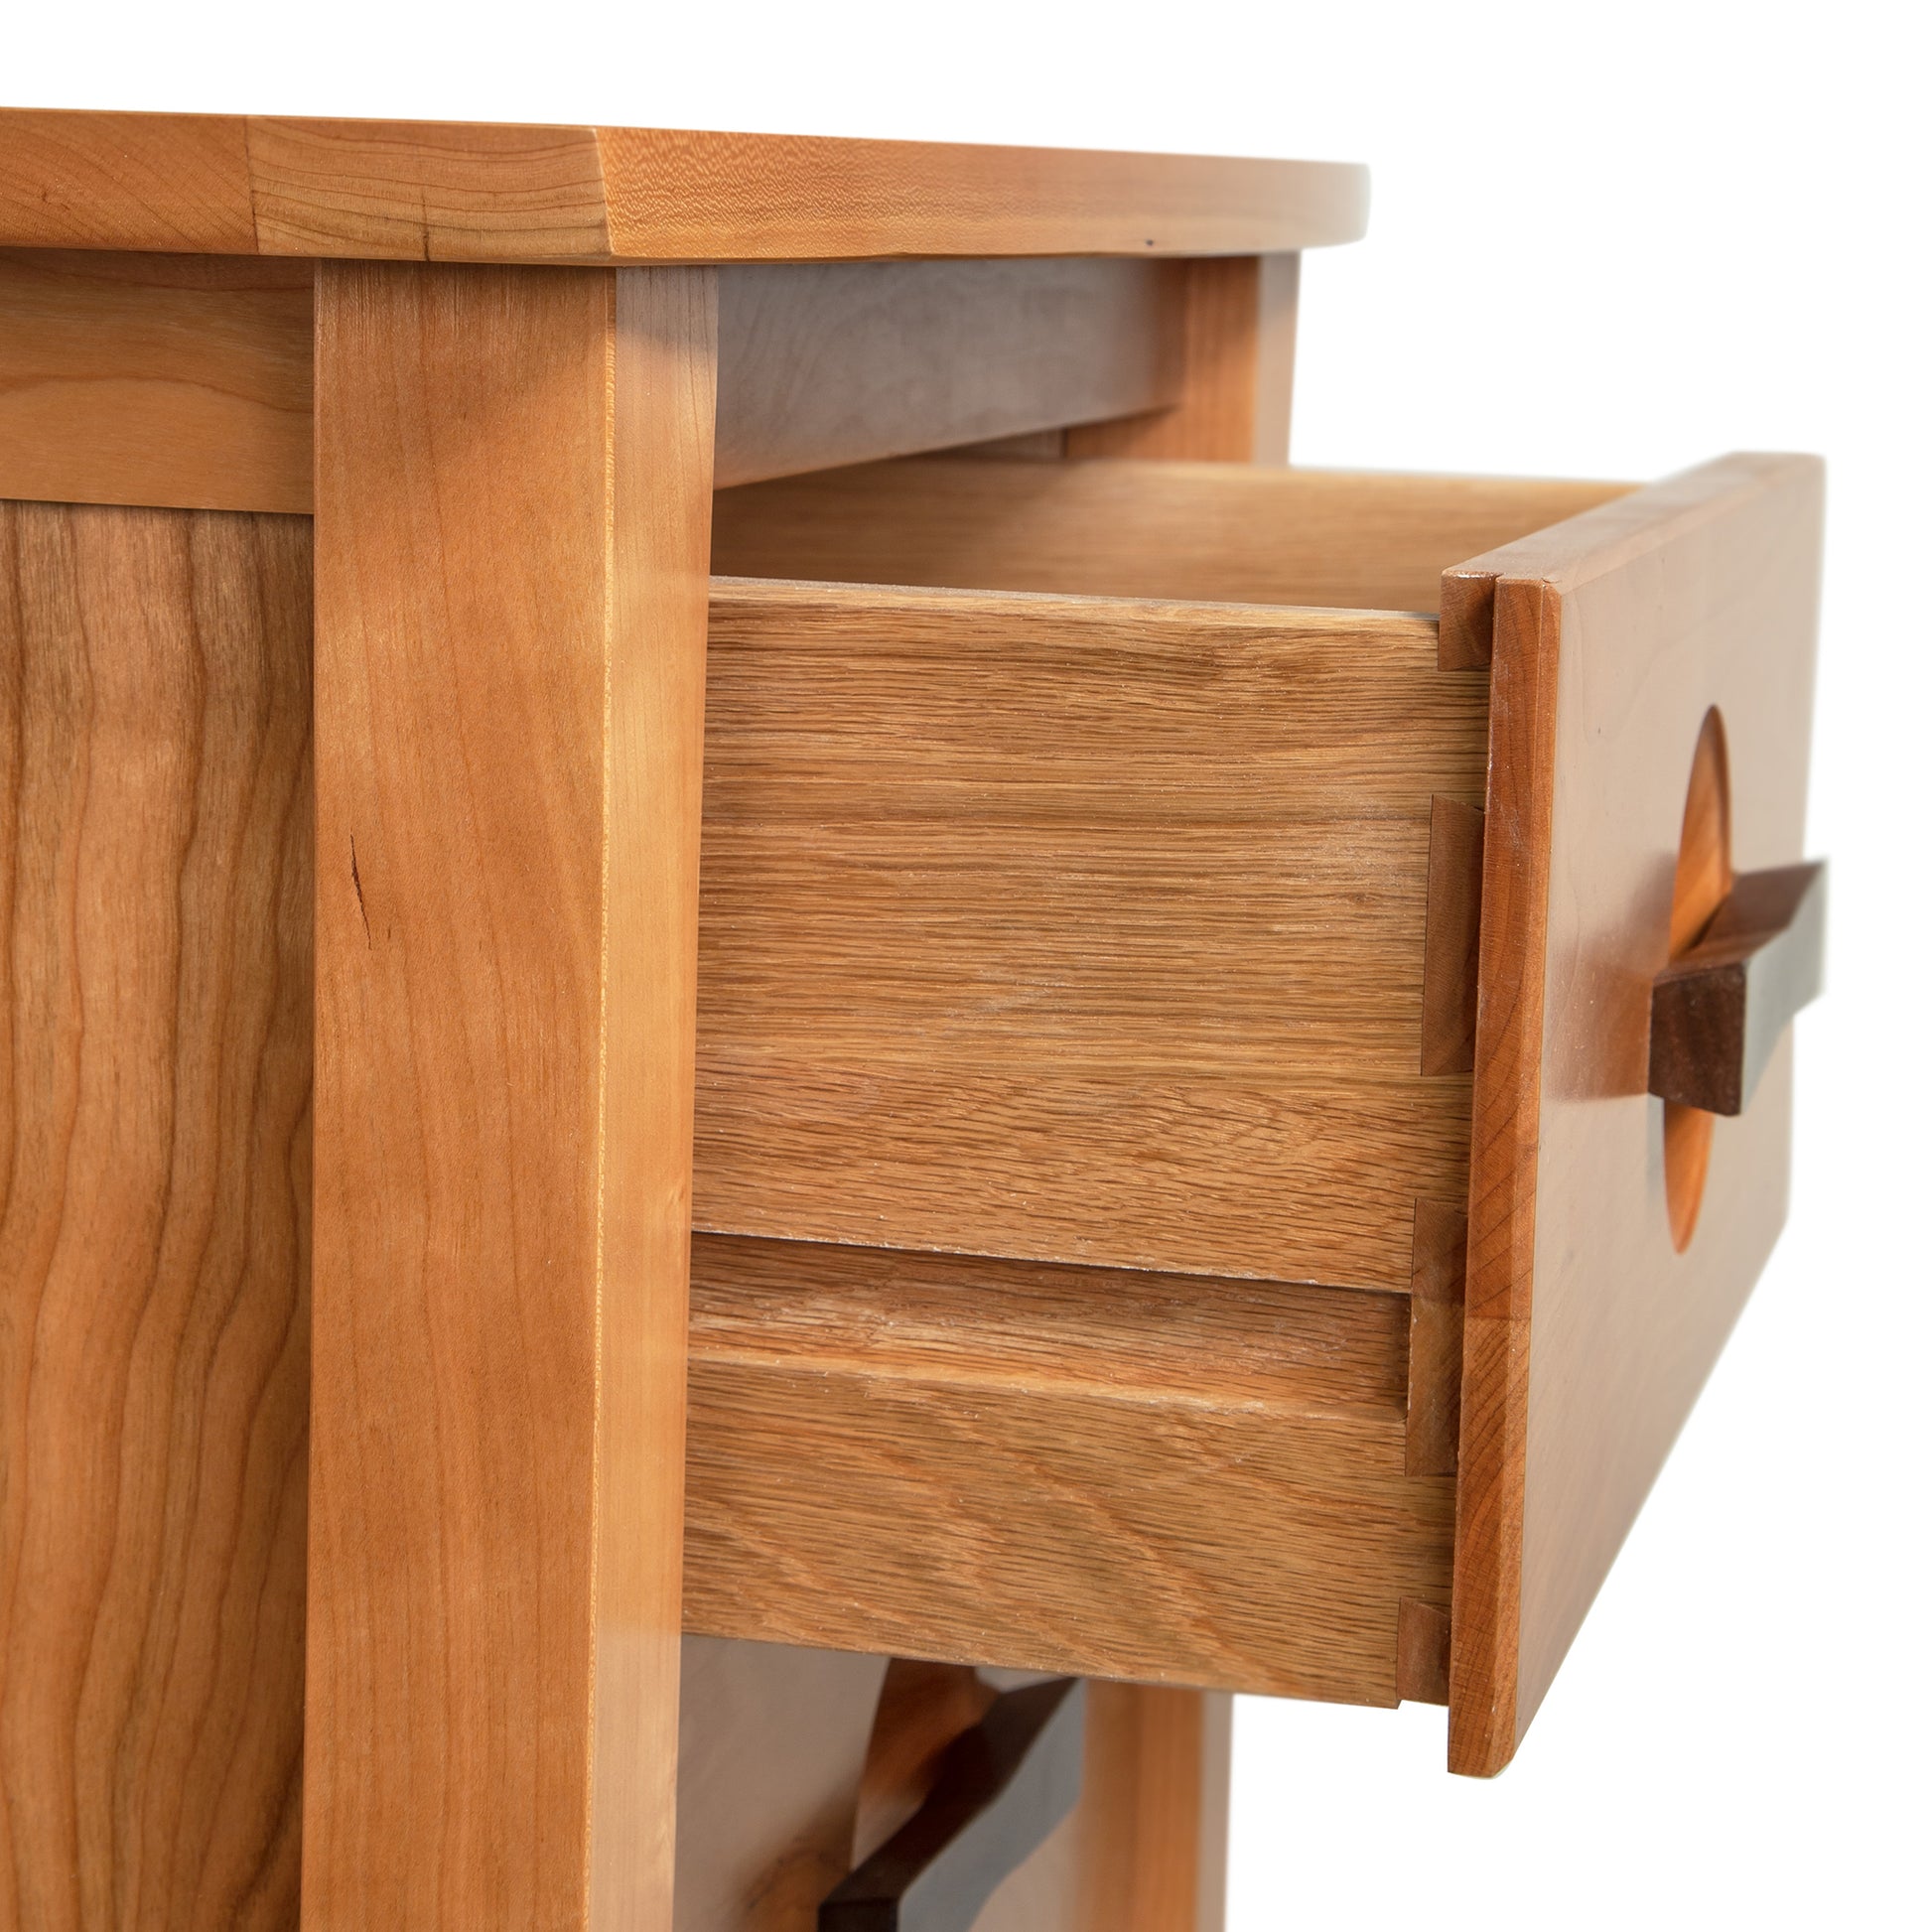 A close up of a wooden nightstand with drawers.